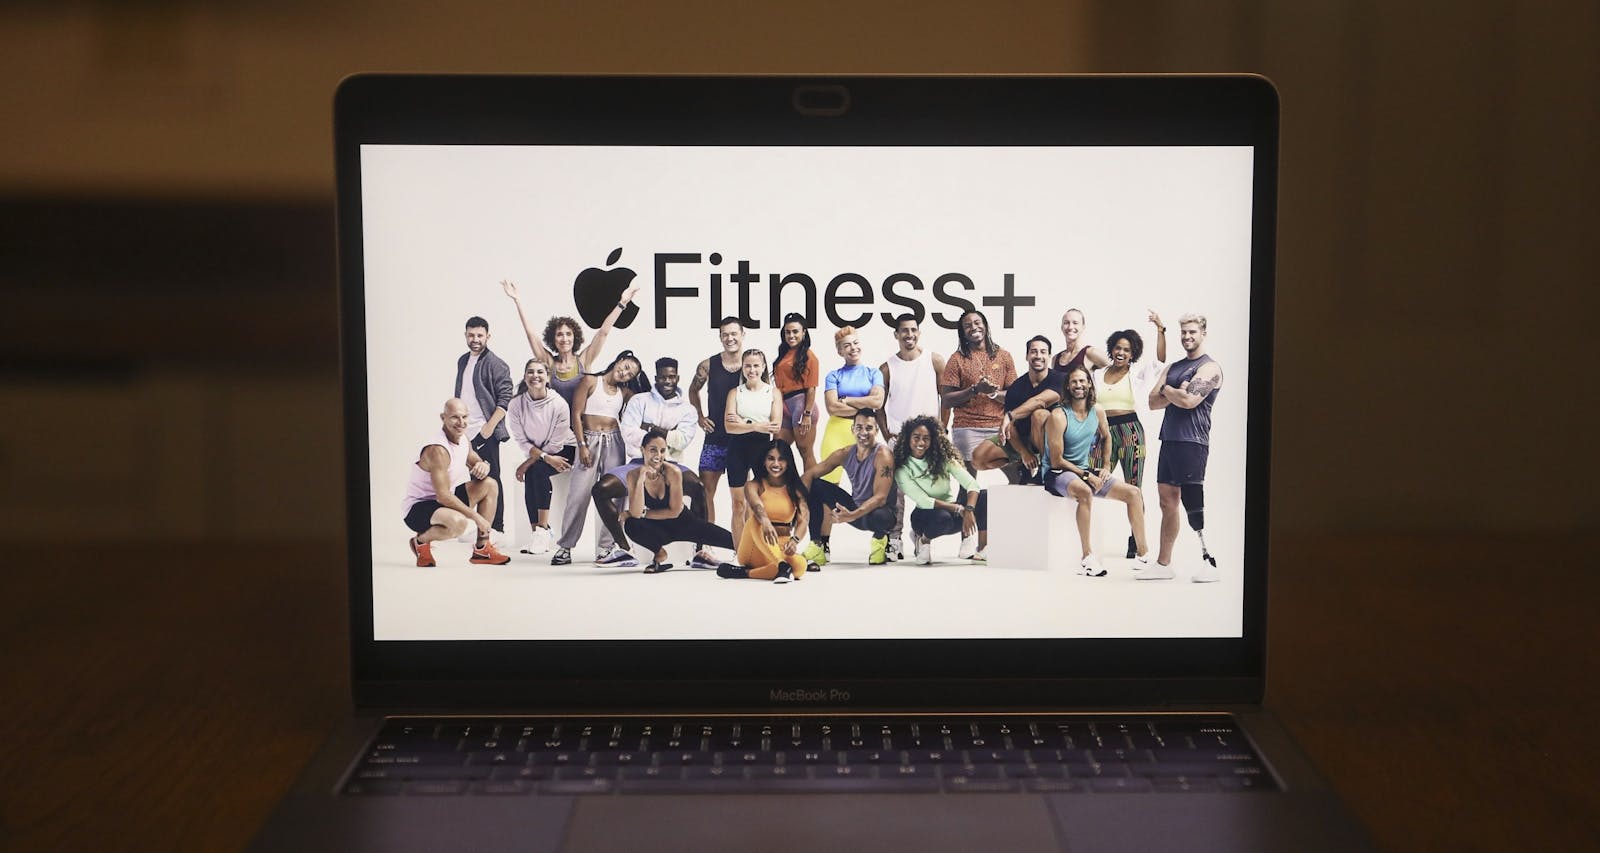 A graphic for Apple's new Fitness+ service unveiled today. Photo by Bloomberg.